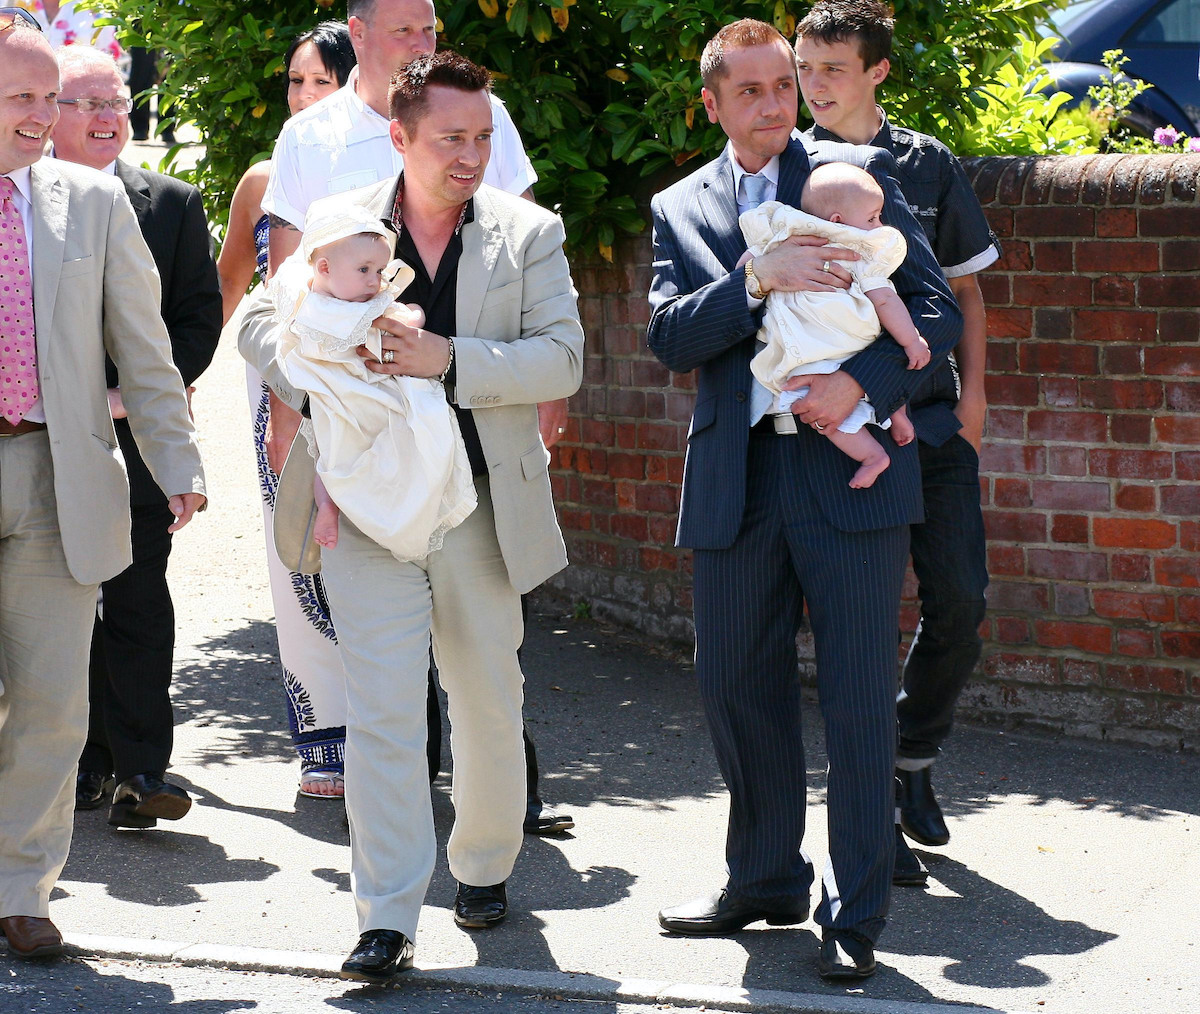 Gay couple Barrie and Tony Drewitt-Barlow carry their new twins Jasper and Dallas away from St. John the Baptist Church in Danbury, Essex